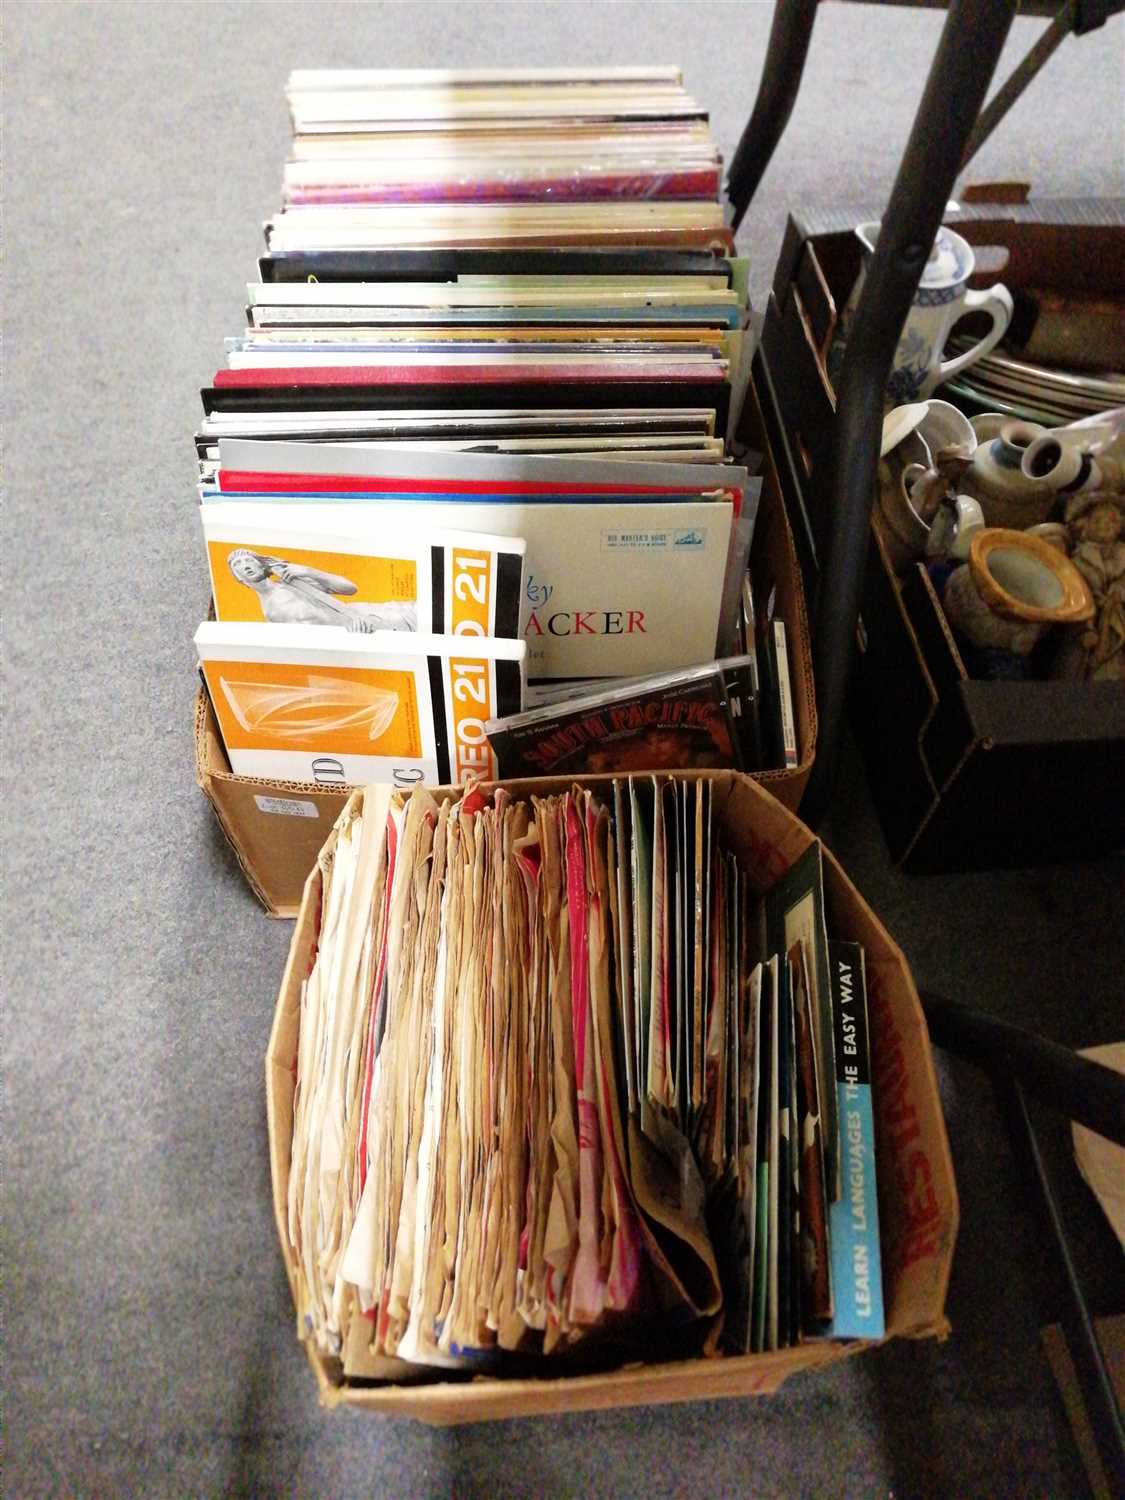 Lot 101 - Vinyl music records, two boxes of LPs, singles and 78s, mostly Classical music.